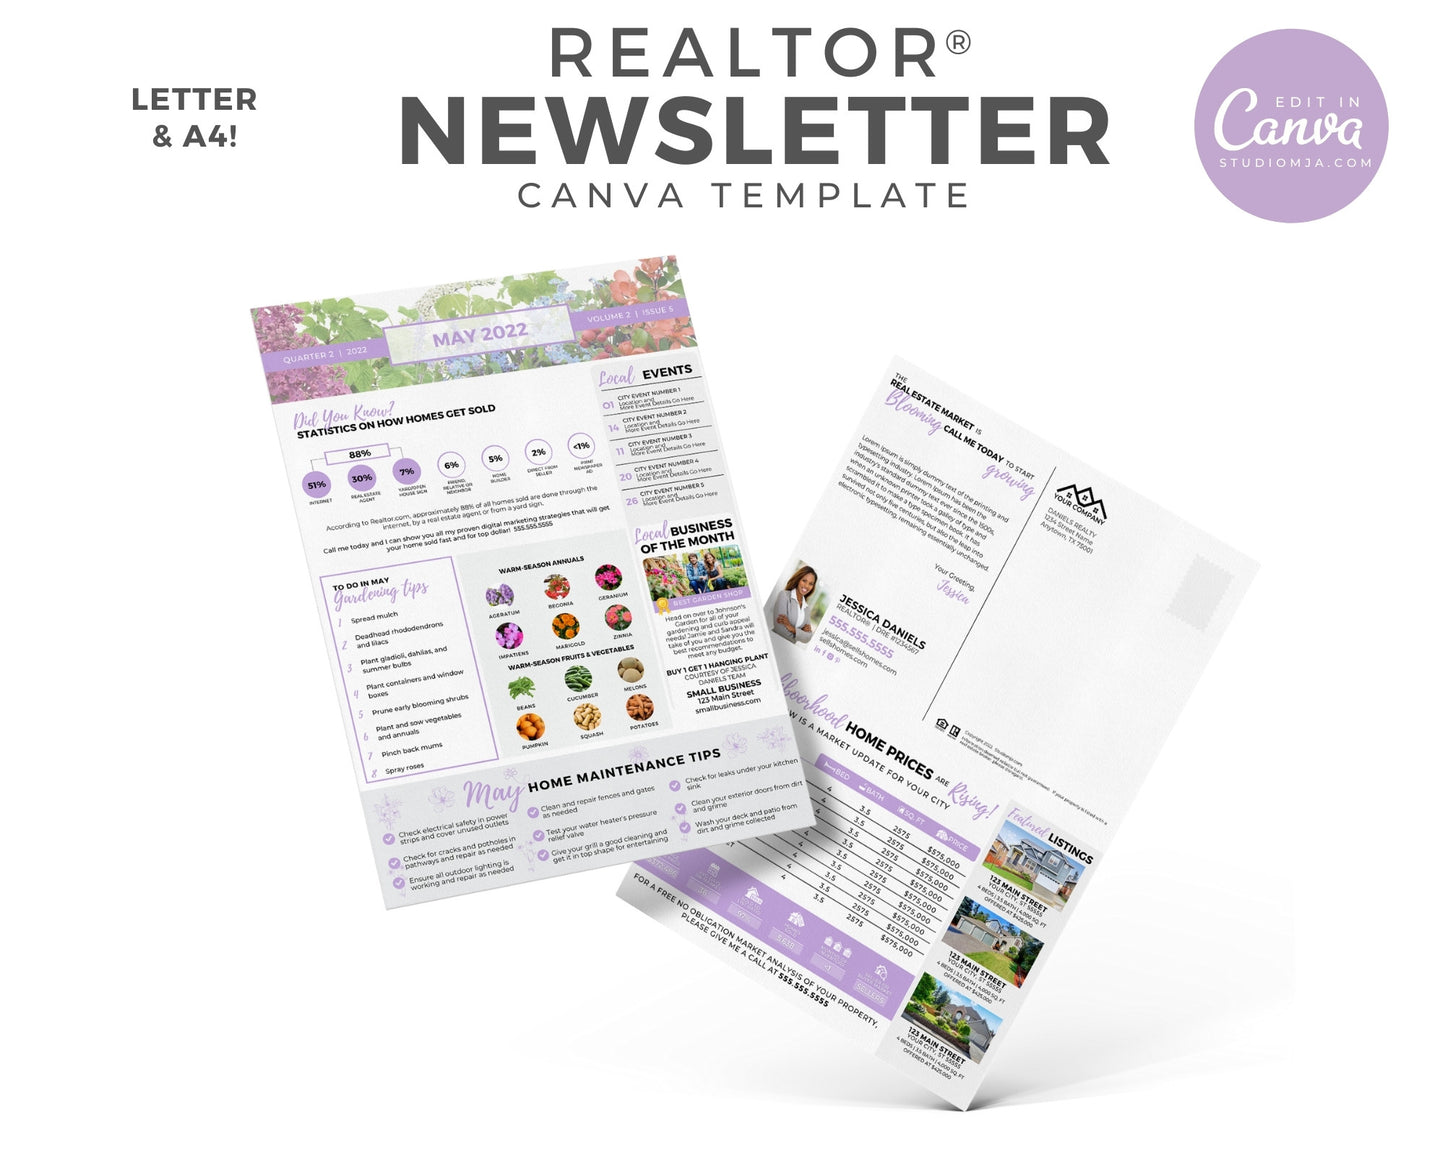 Realtor Newsletter BiFold Template | May 2022